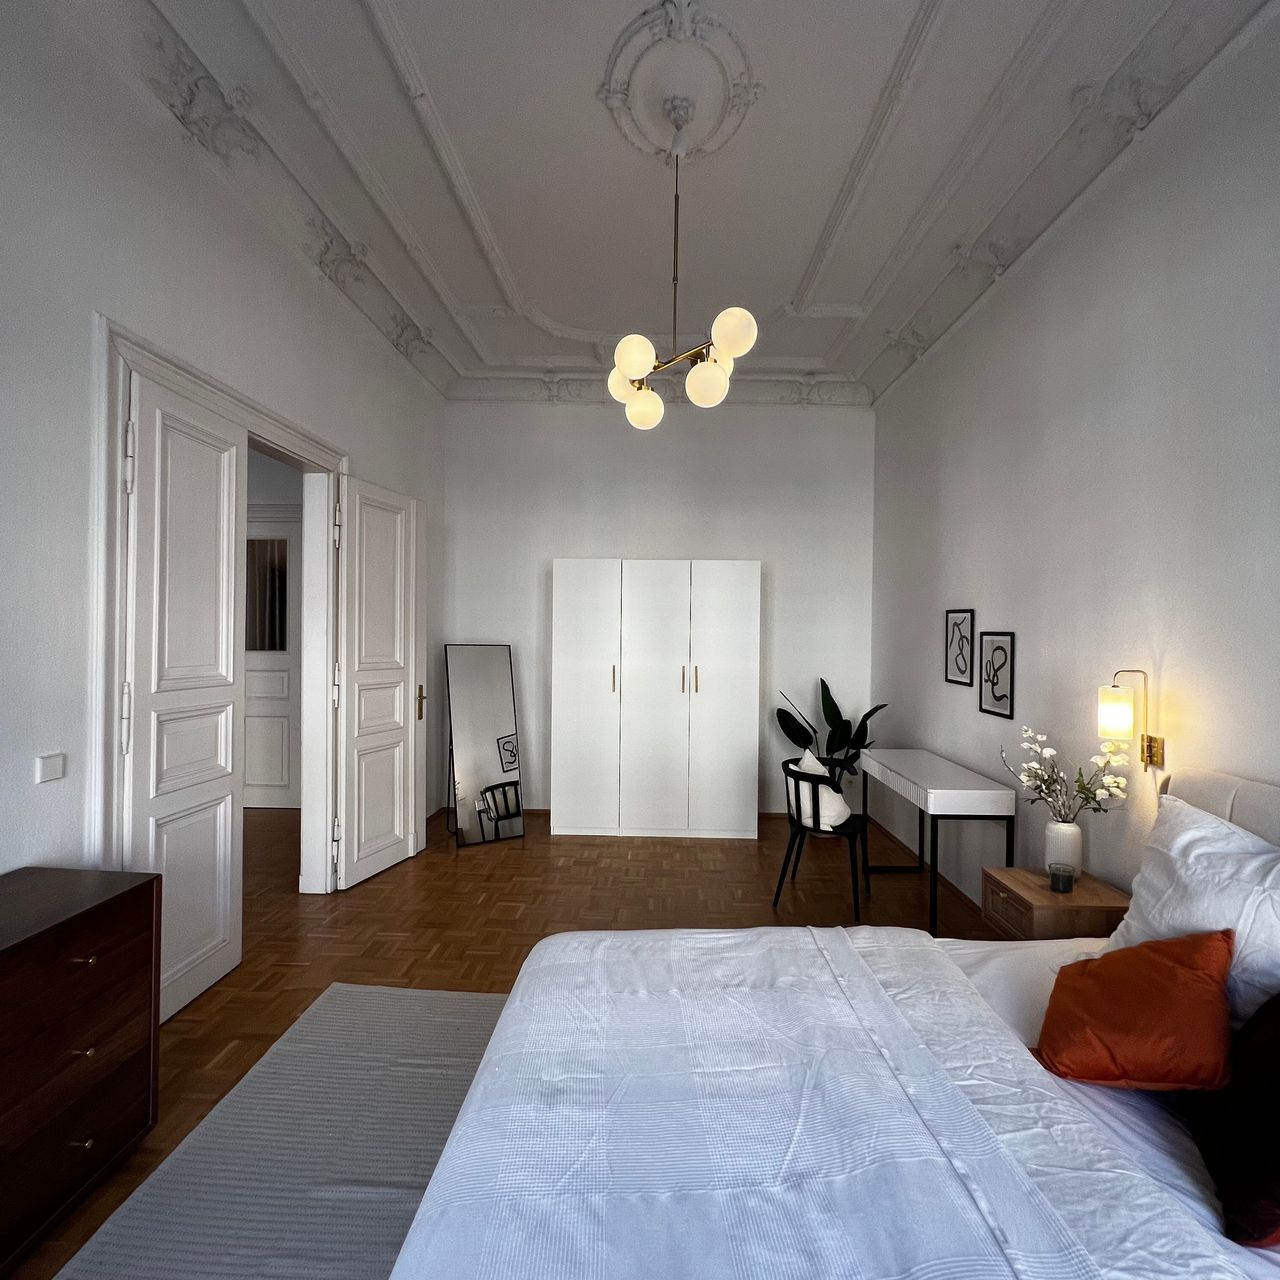 STUNNING 2 ROOM APARTMENT IN CENTRAL LOCATION LEIPZIG